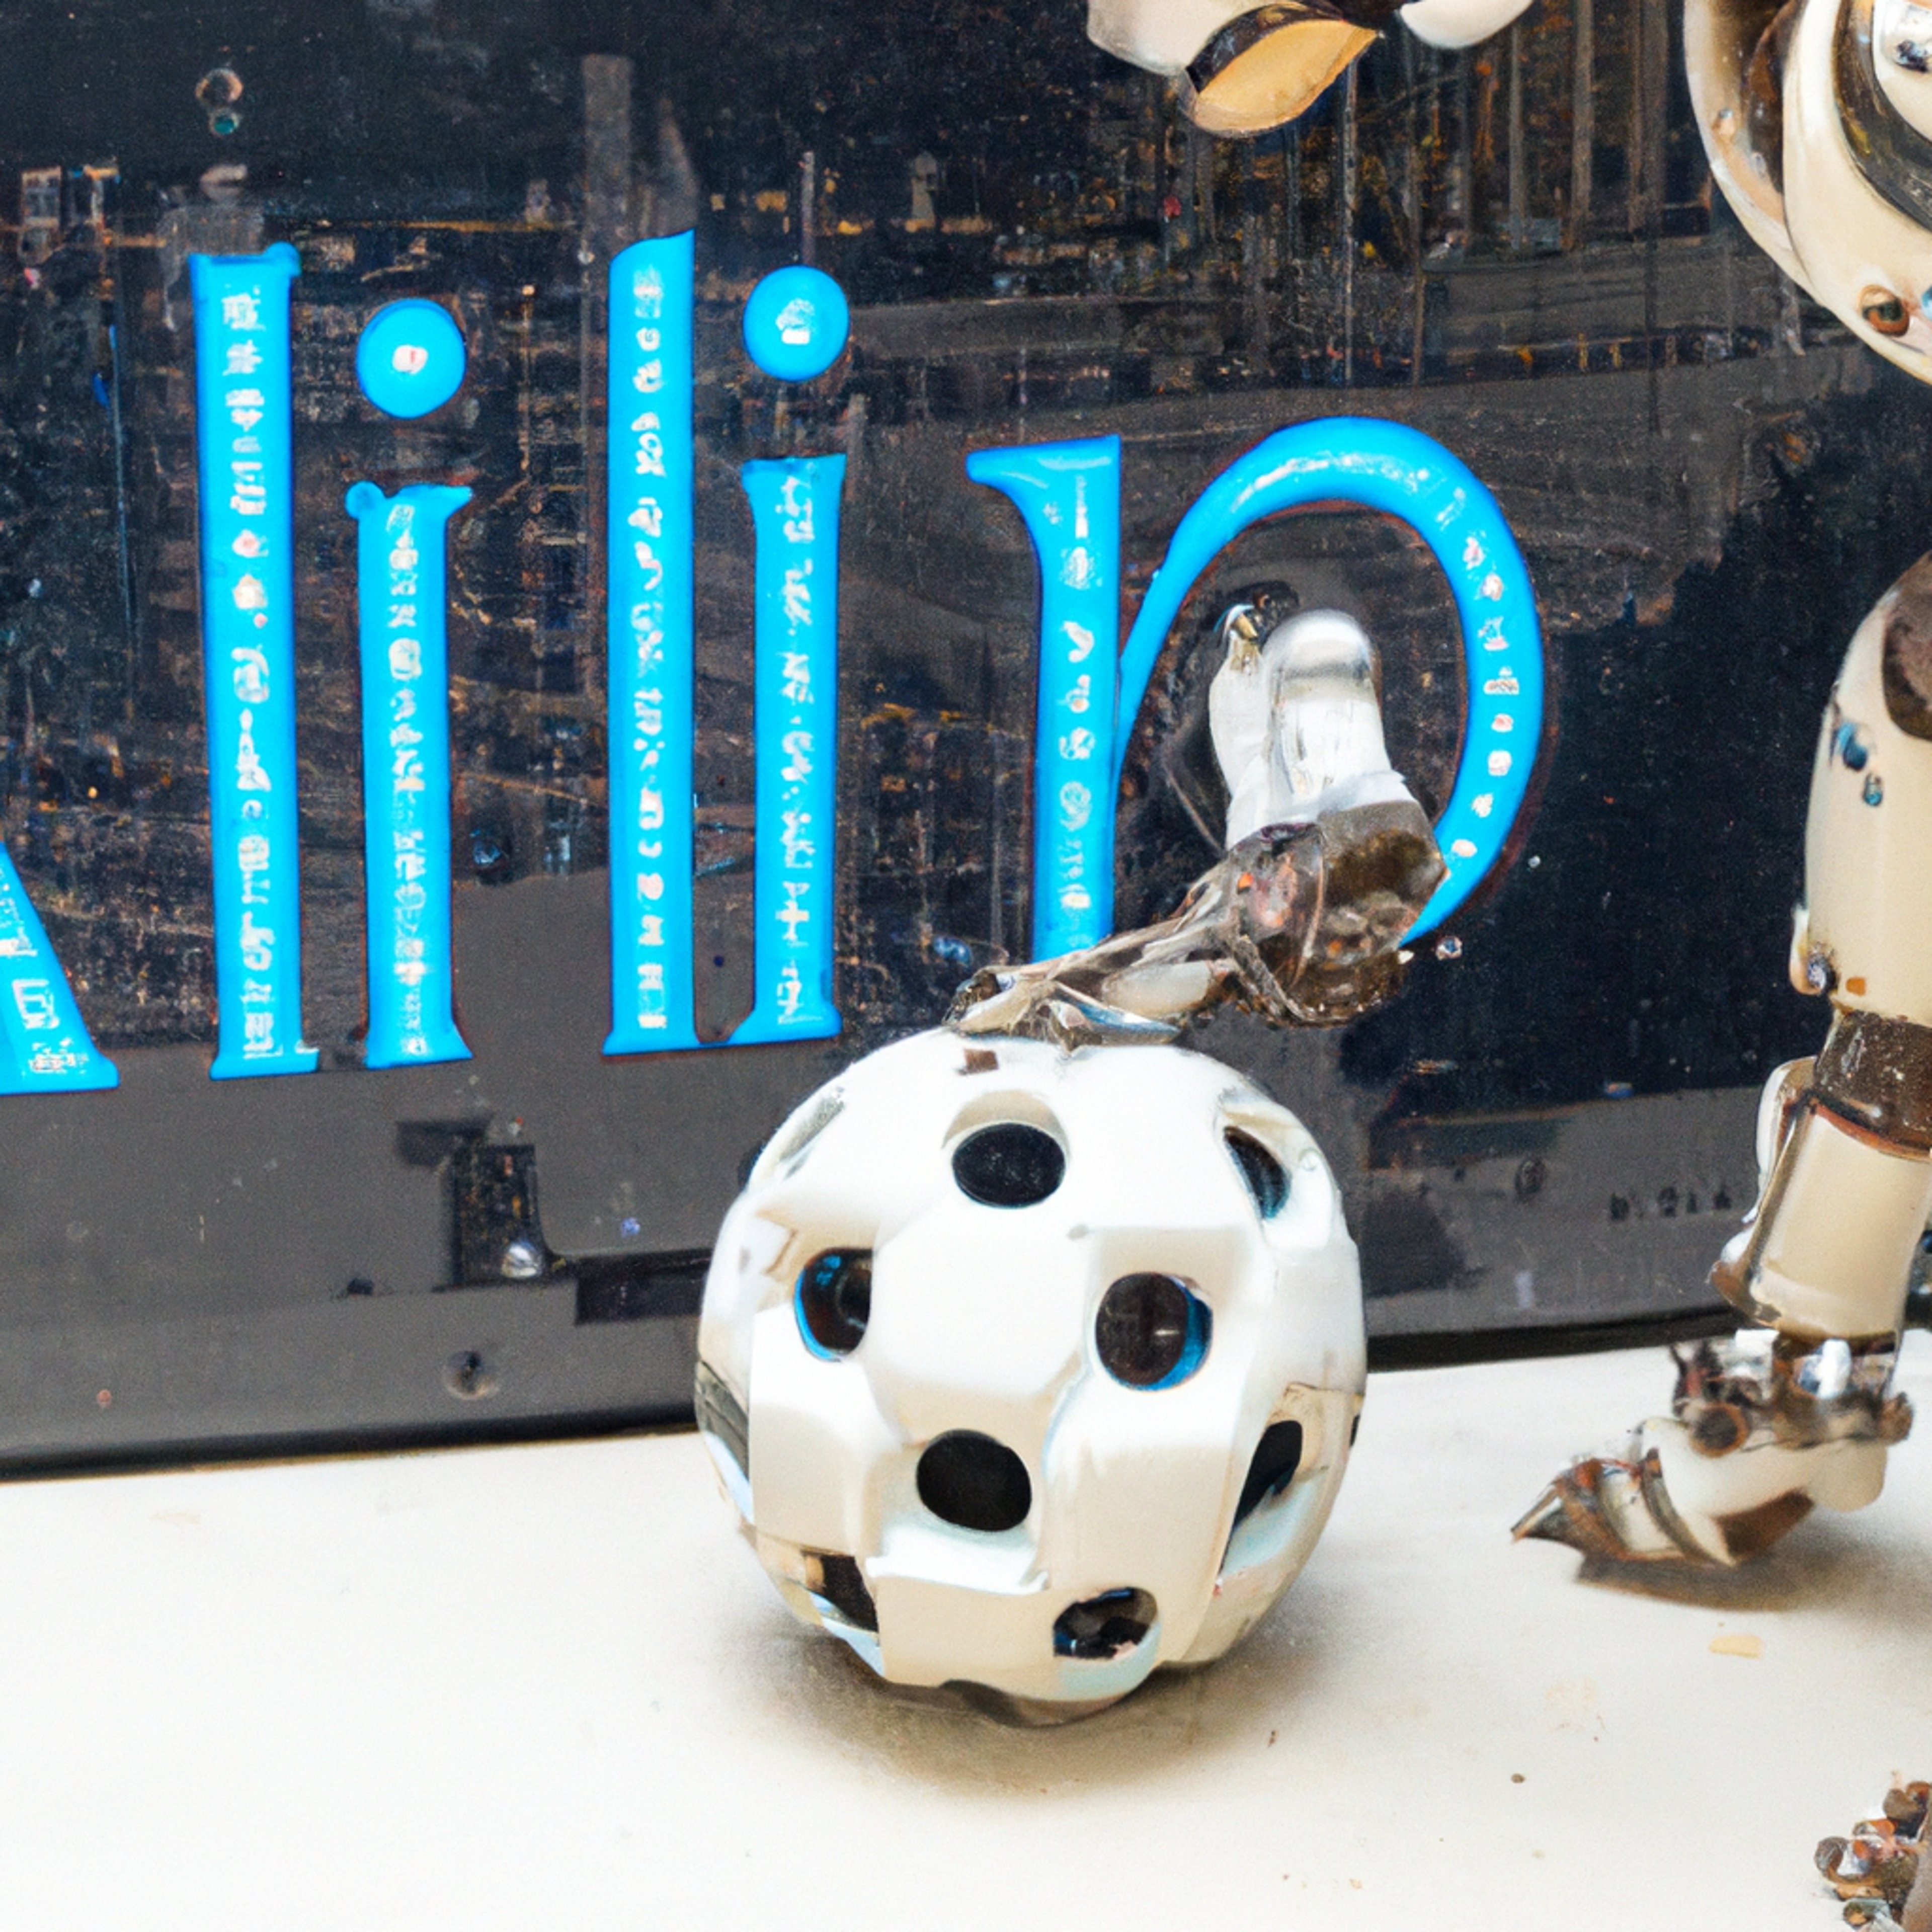 Future of Life Institute Calls for More Capable AI Models Than OpenAI's GPT-4